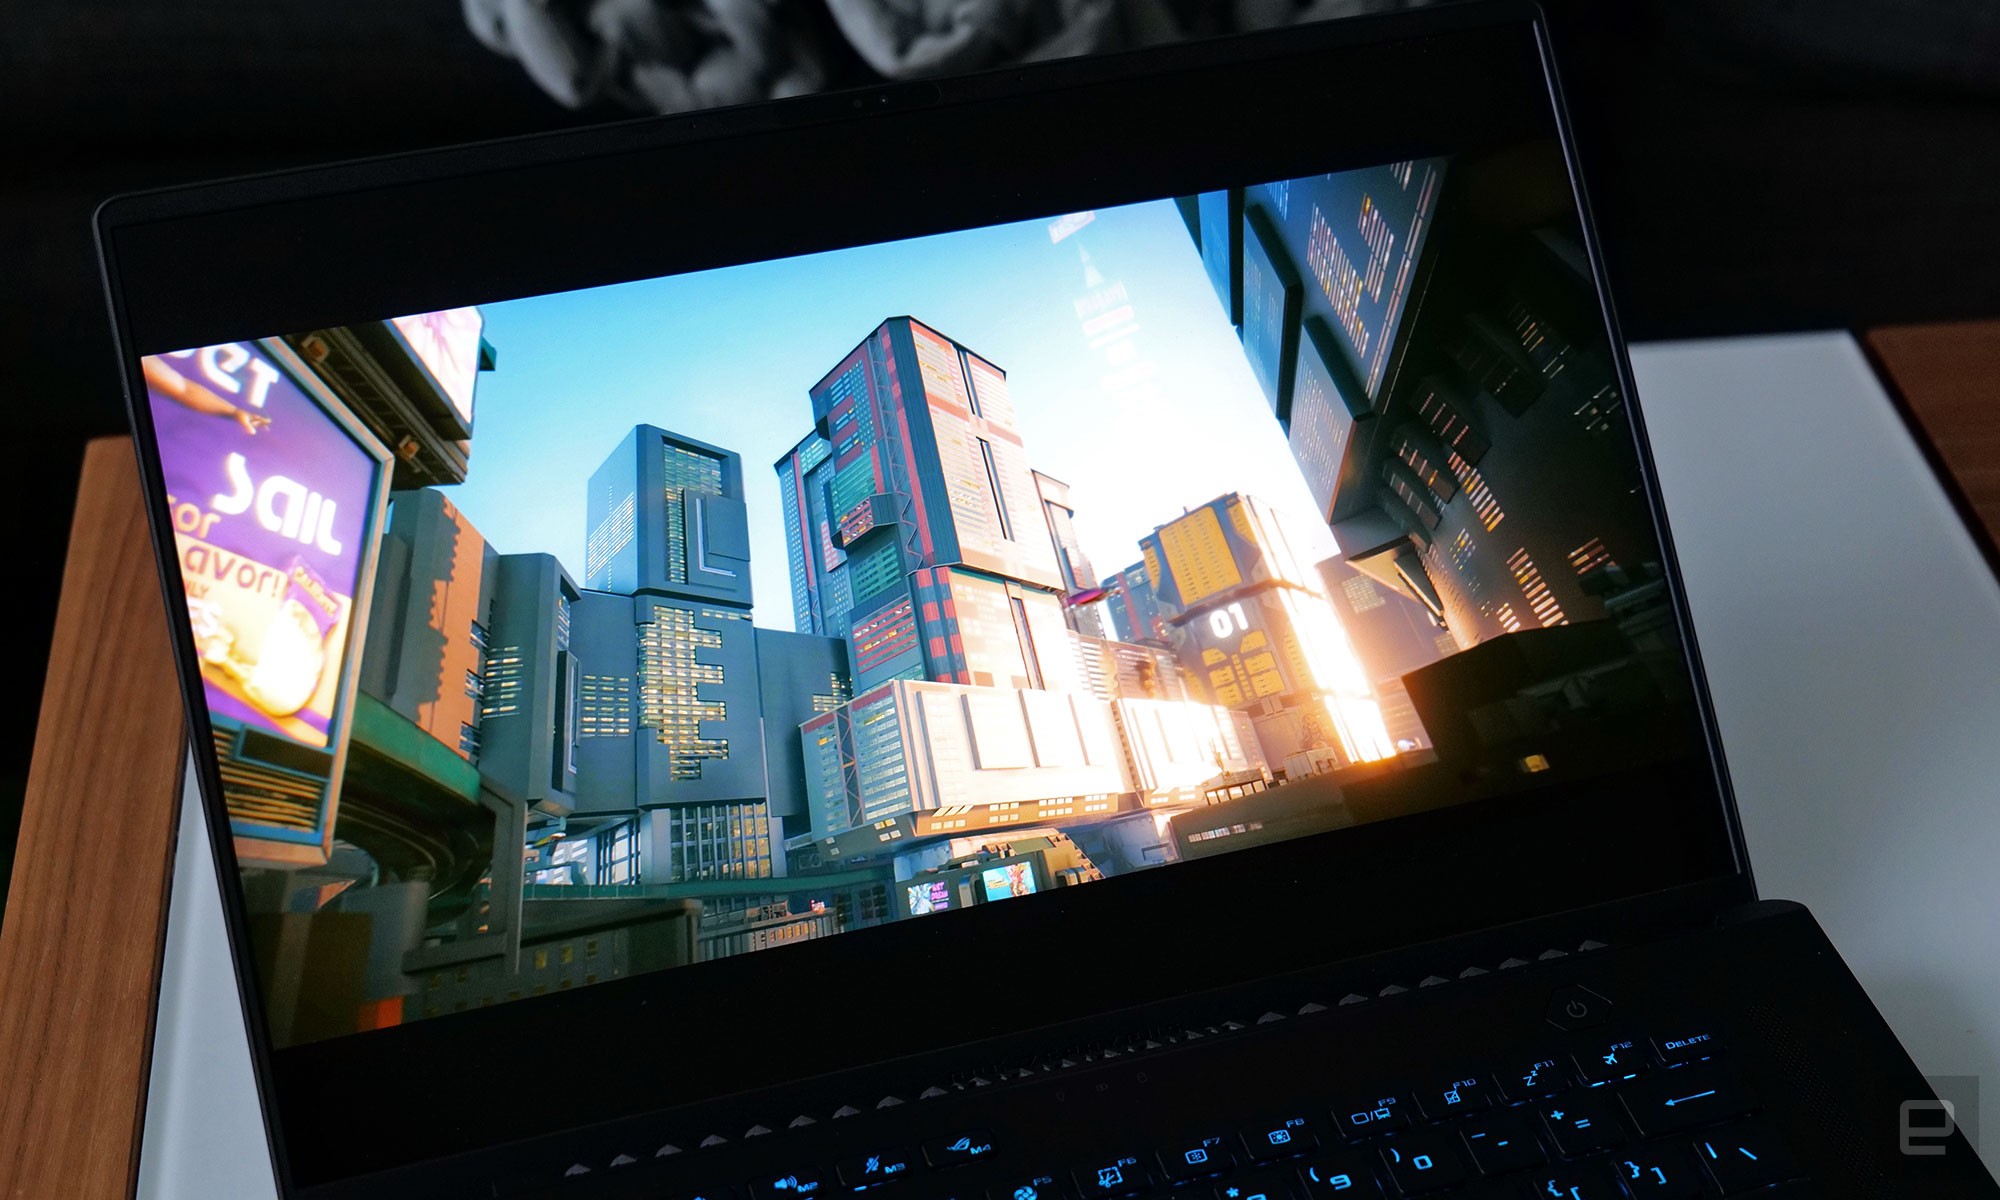 For 2023, the new Mini LED screen on the ASUS ROG Zephyrus M16 features 1,024 local dimming zones along with a peak brightness of up to 1,100 nits. 